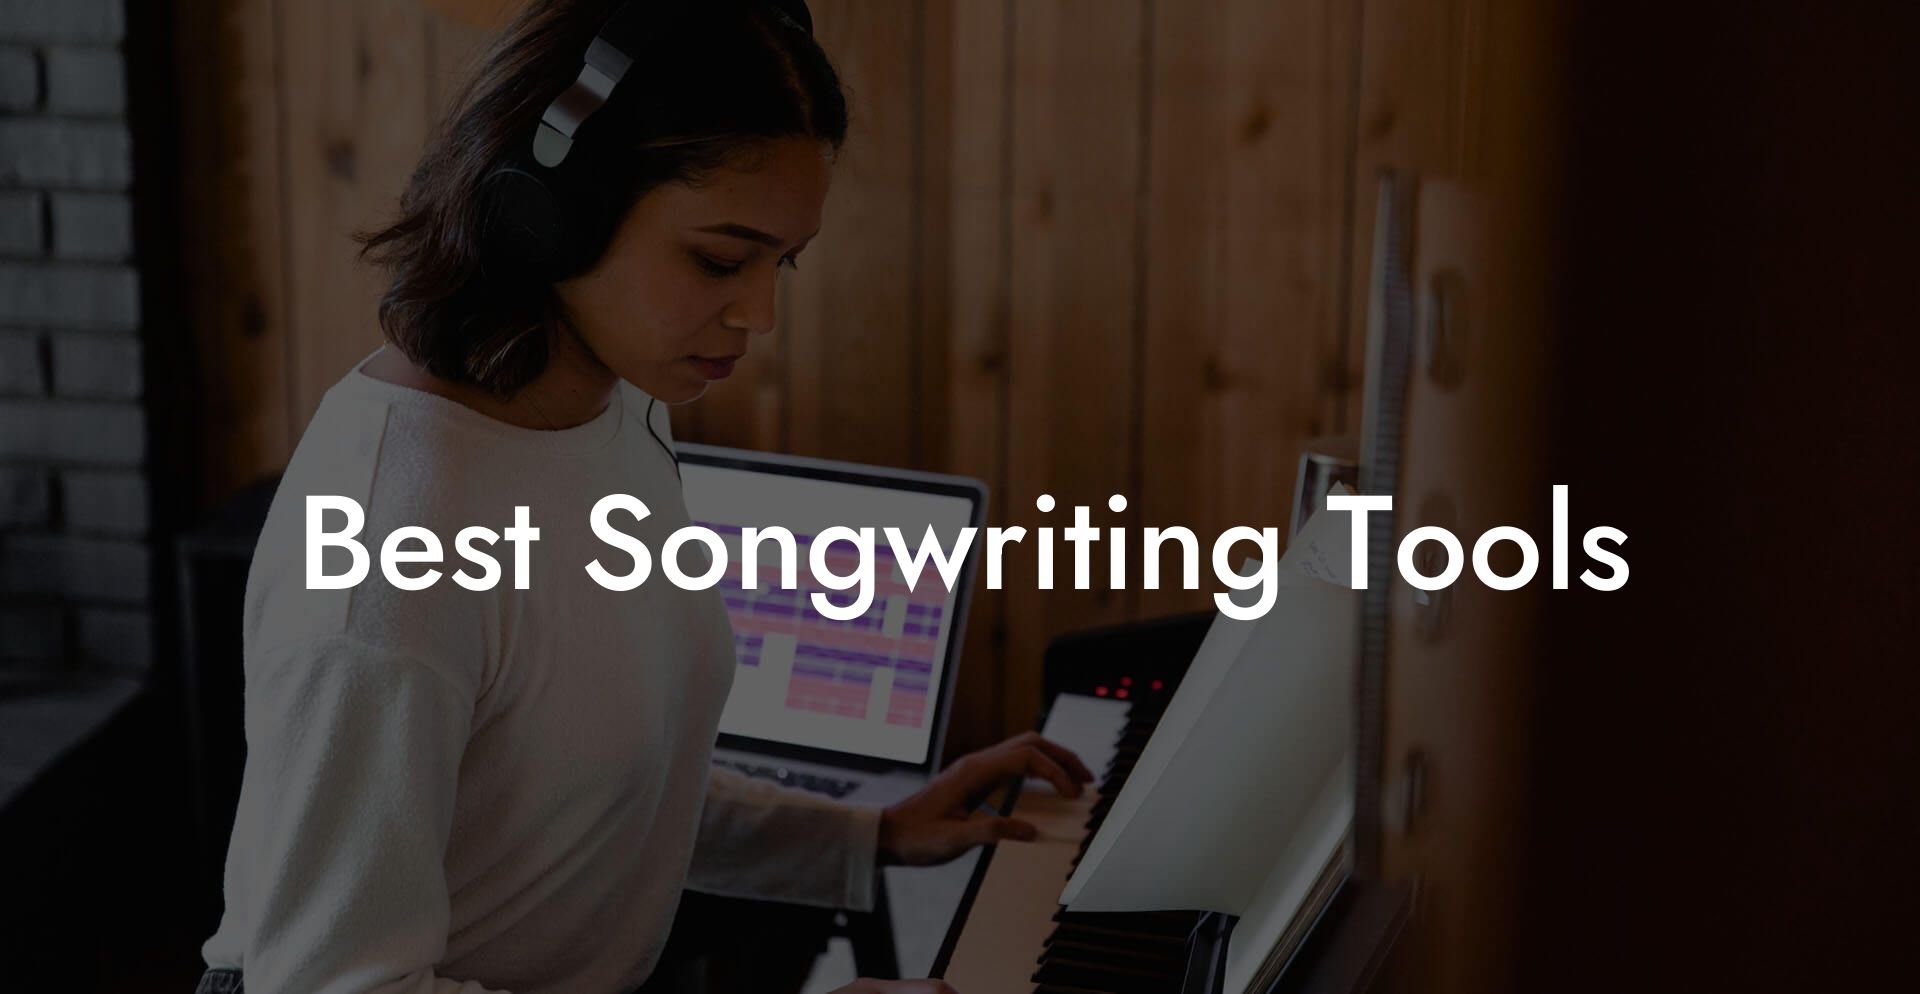 best songwriting tools lyric assistant